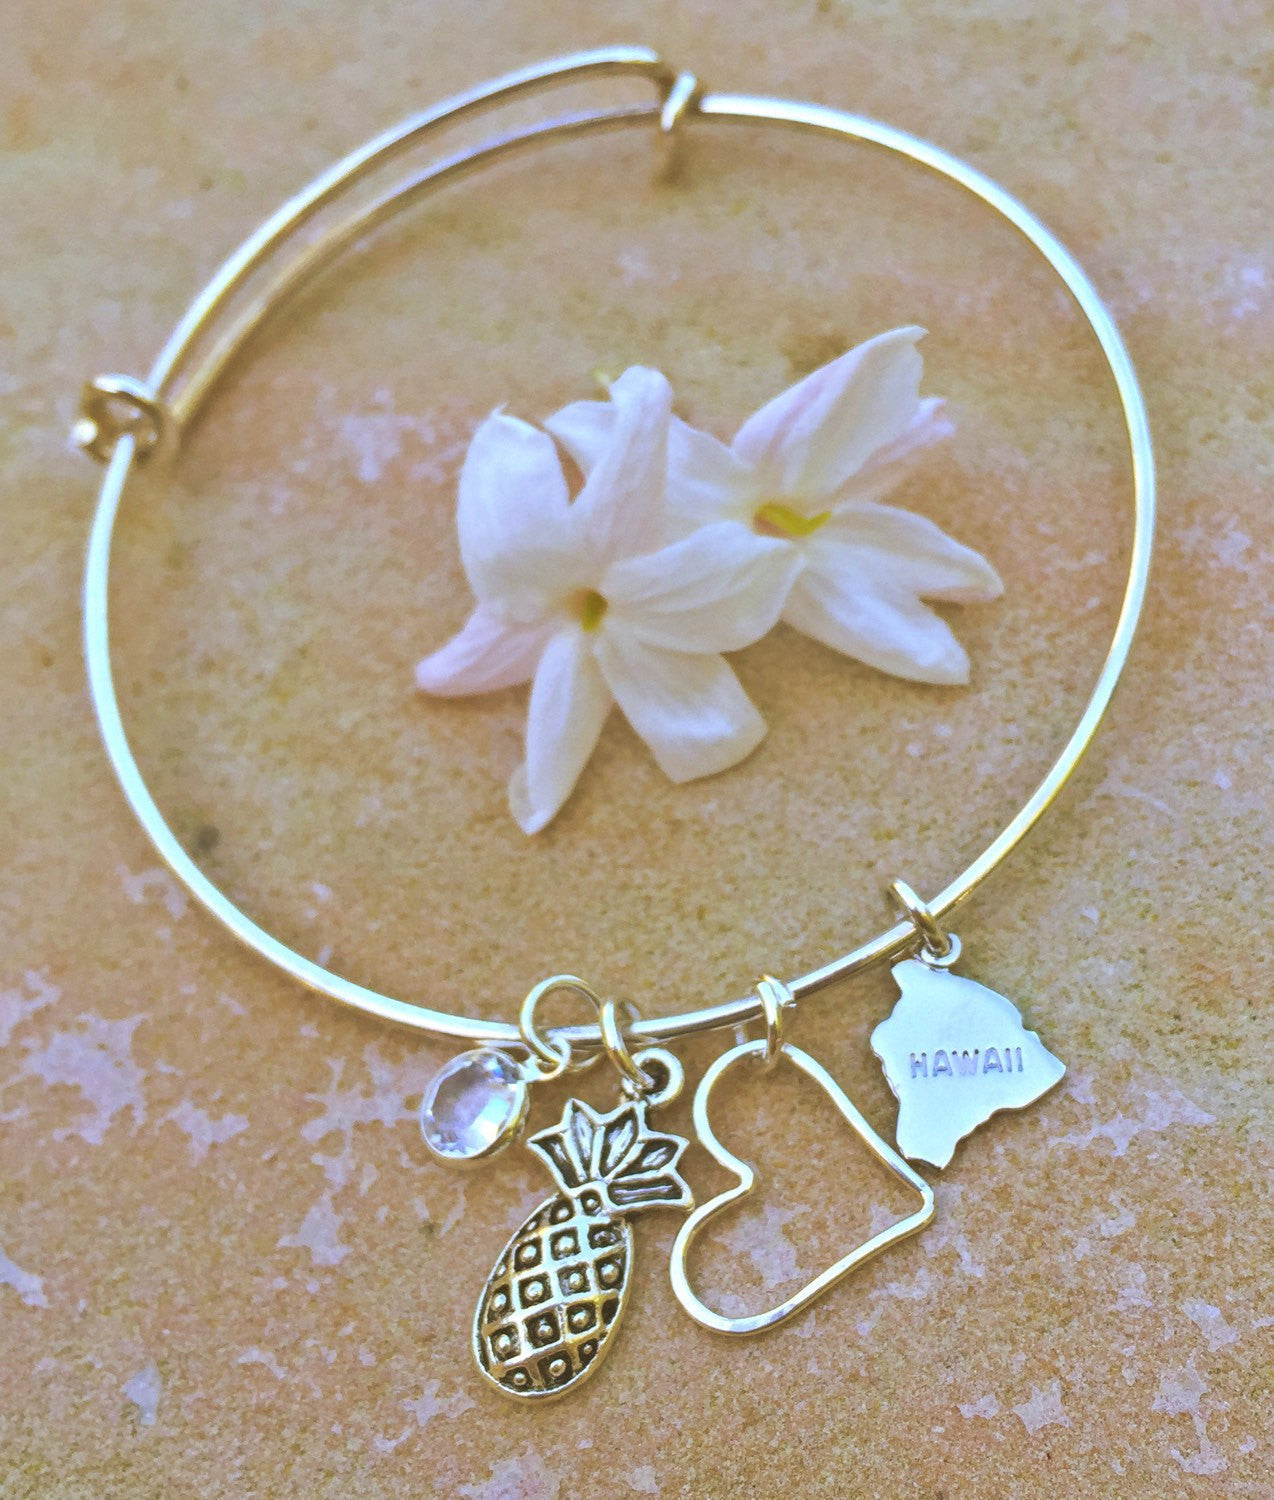 Hawaiian Bangle, Hawaiian Jewelry, Personalized Bangle Bracelets , Beach Bangle, Island Bangle, Hawaii Jewelry, natashaaloha - Natashaaloha, jewelry, bracelets, necklace, keychains, fishing lures, gifts for men, charms, personalized, 